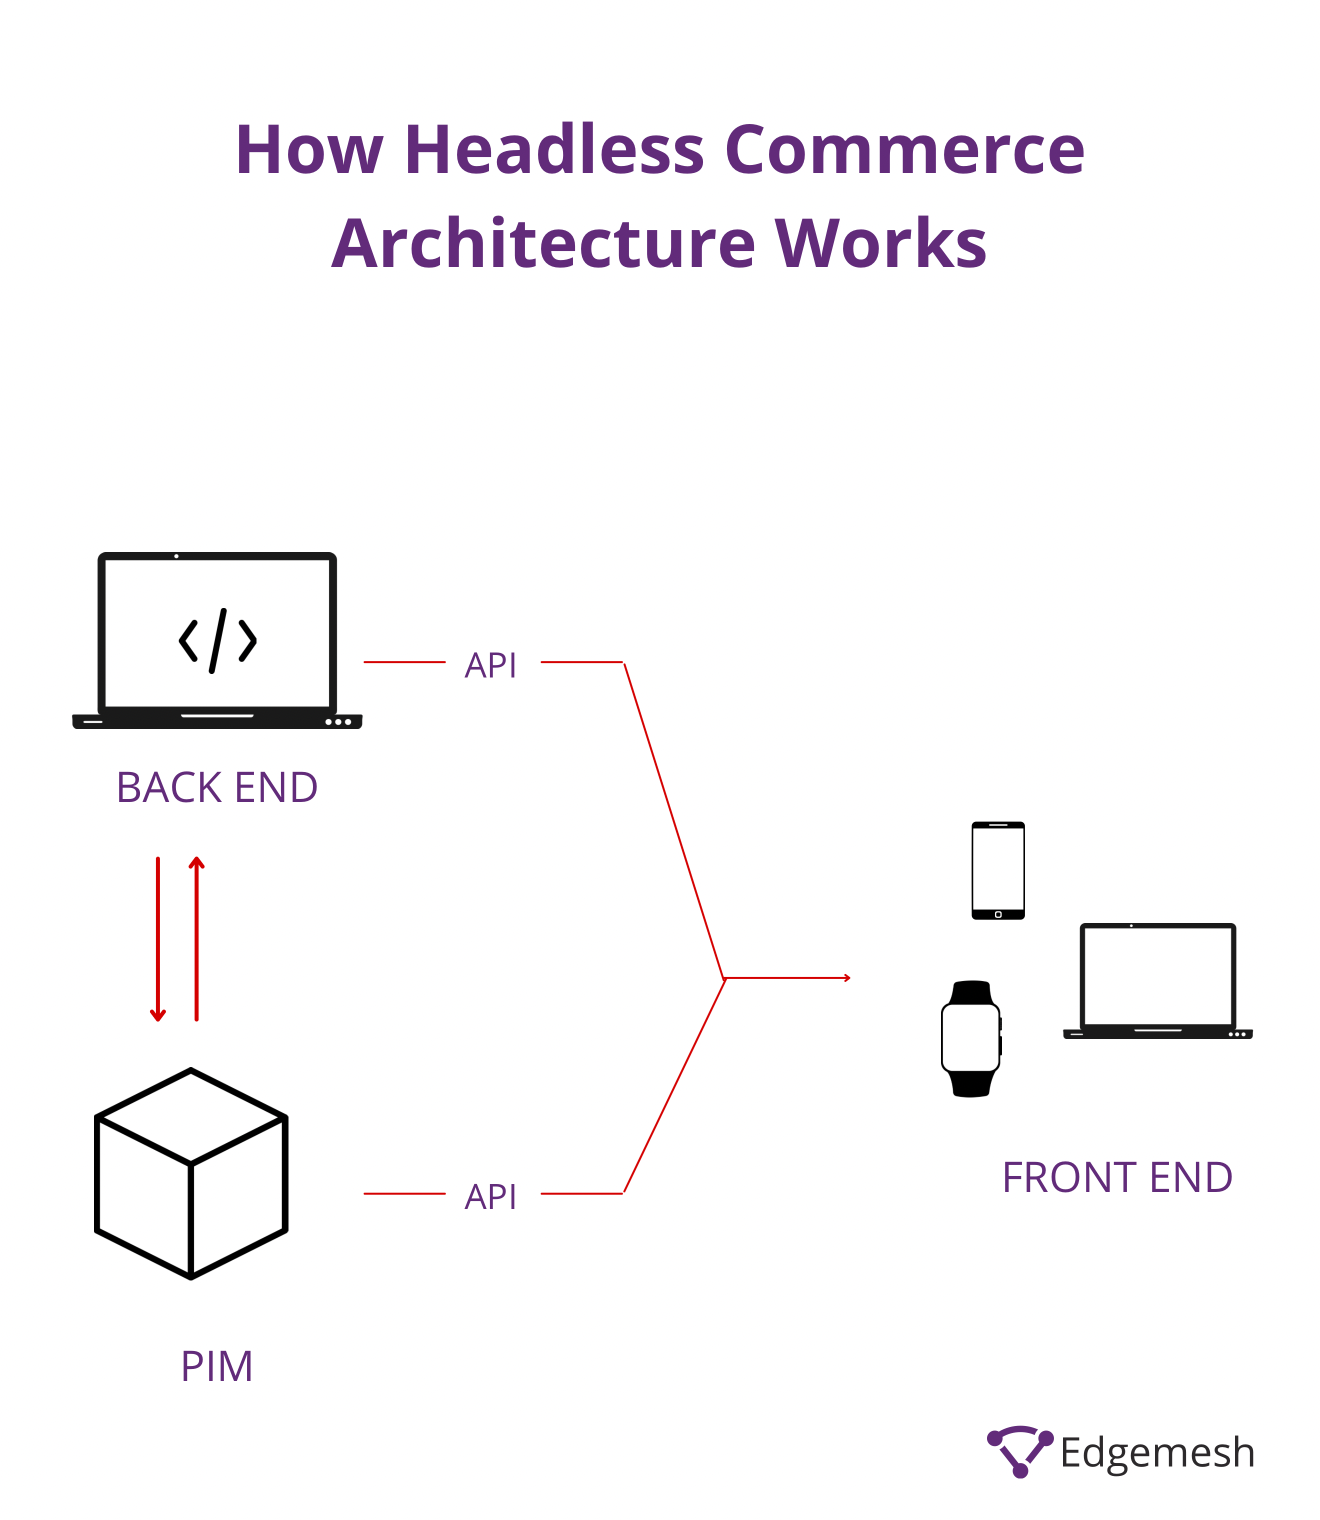 How the headless ecommerce architecture works.